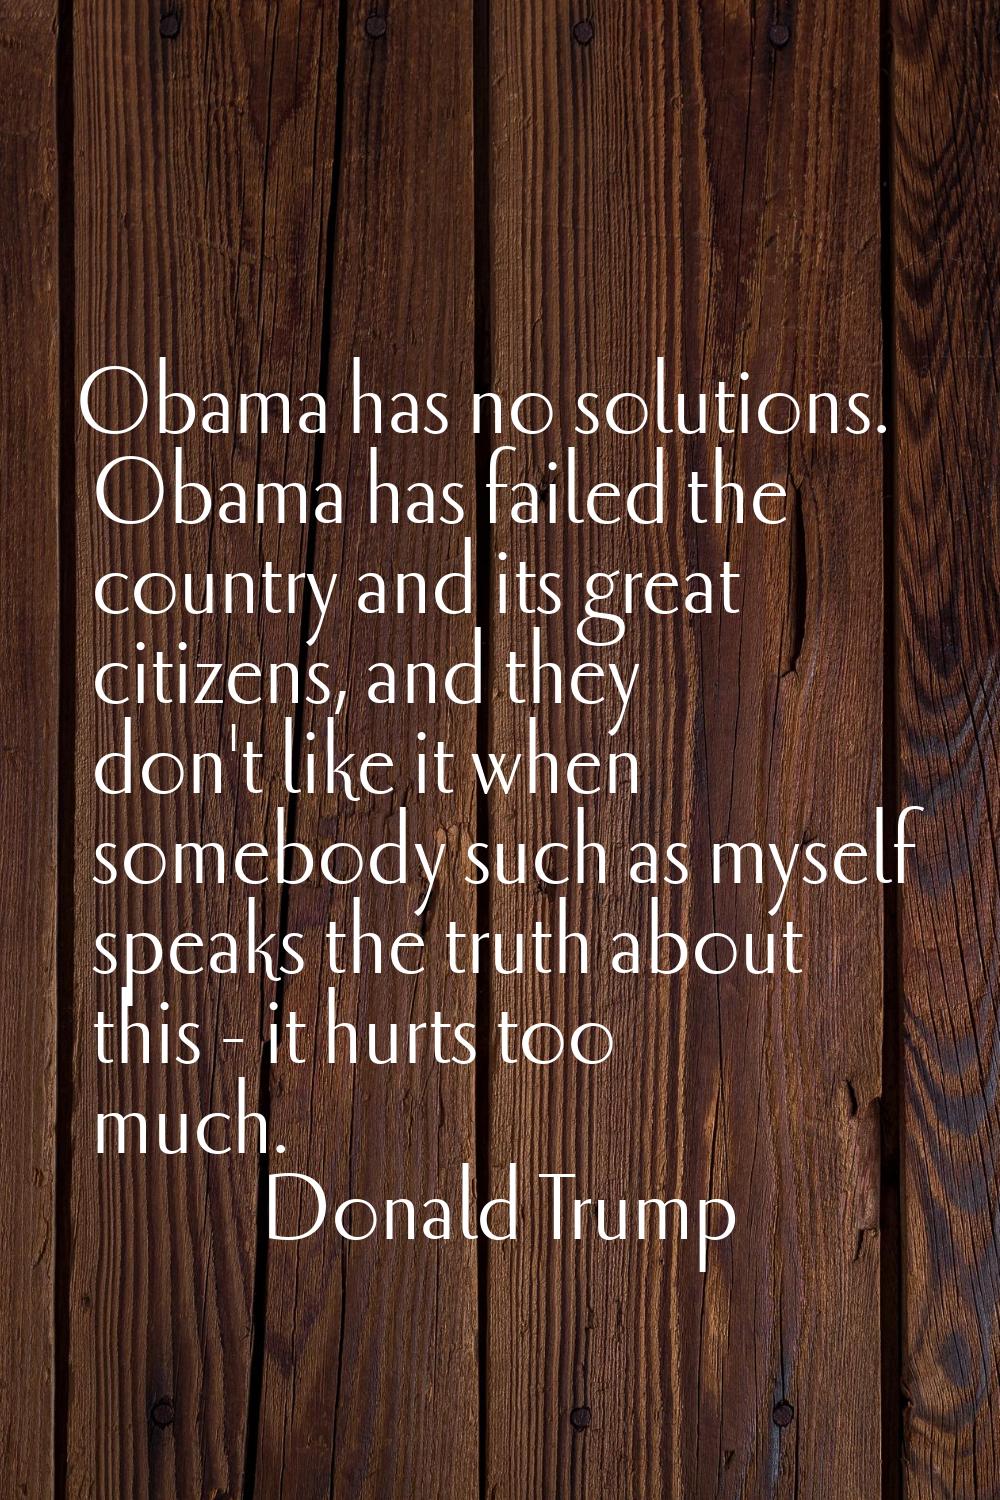 Obama has no solutions. Obama has failed the country and its great citizens, and they don't like it